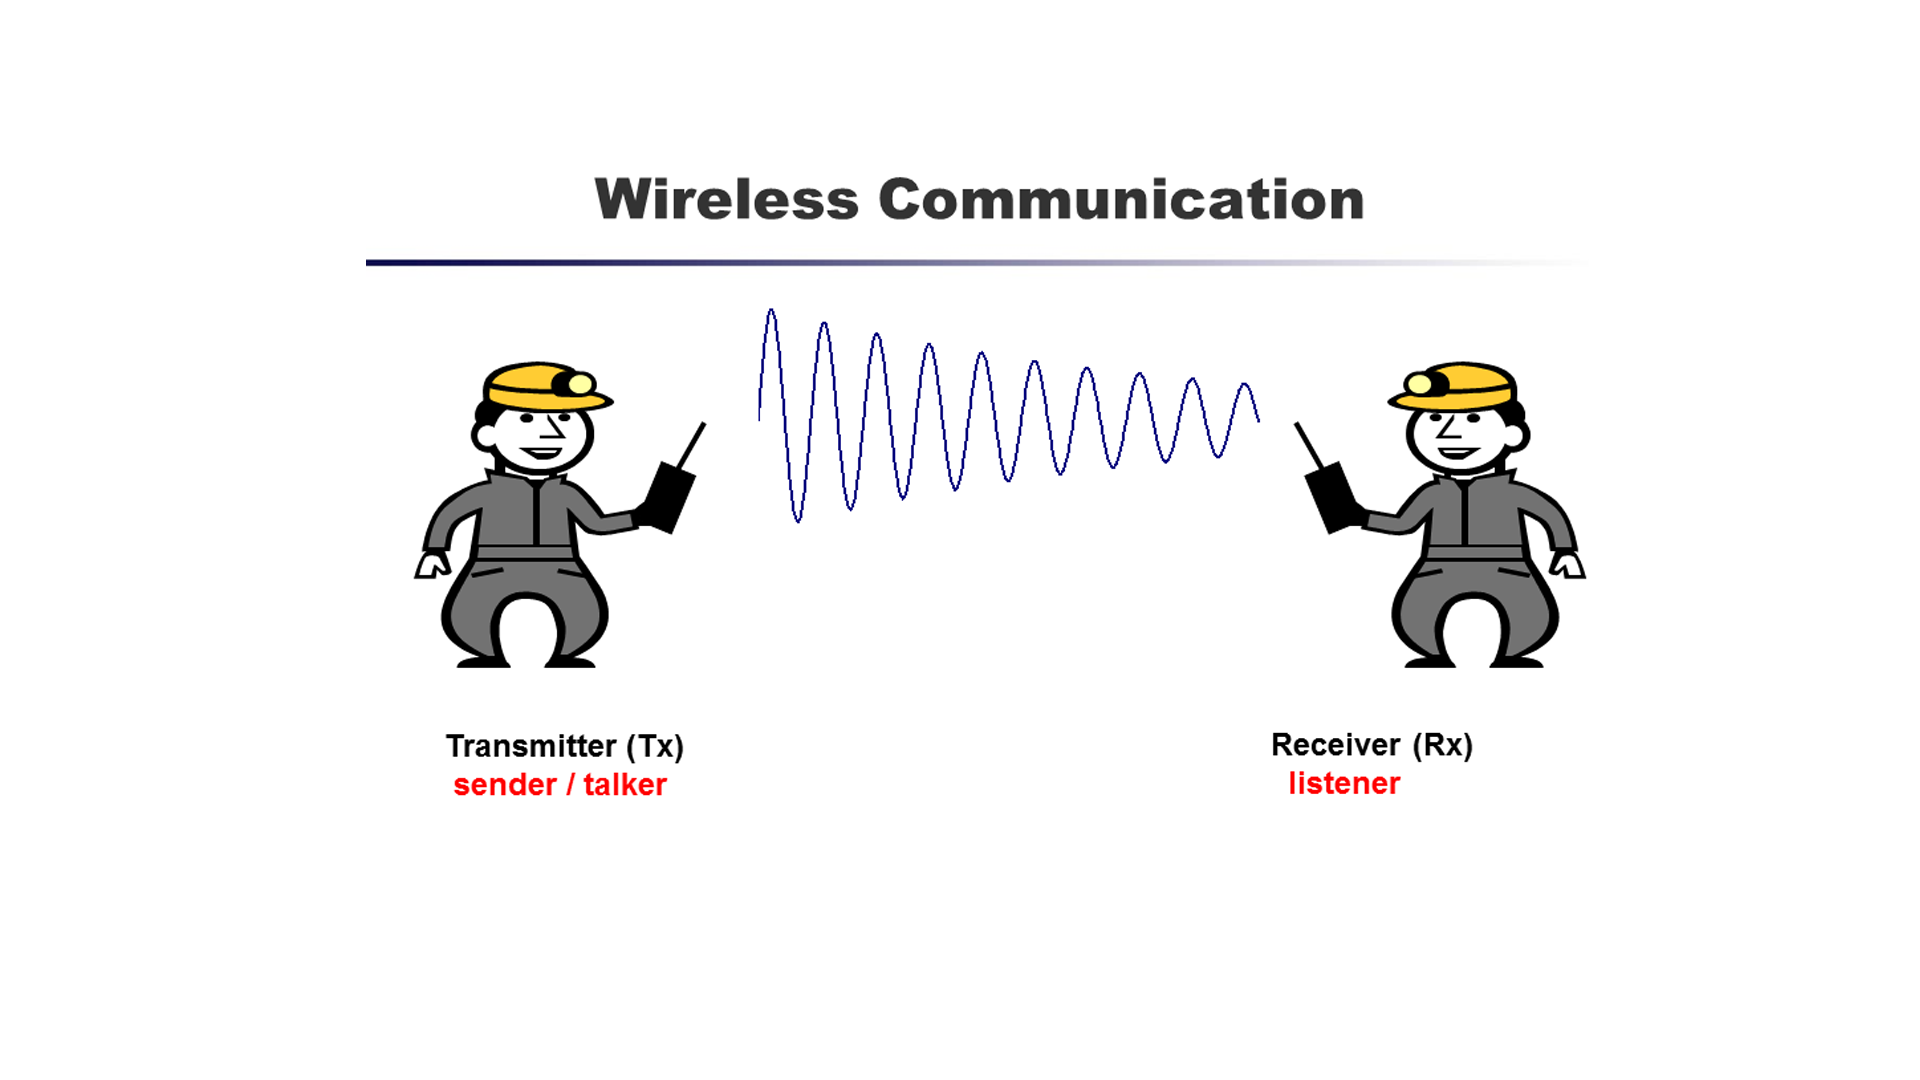 Drawing of 2 men with wavy line between them illustrating transmitter and receiver.